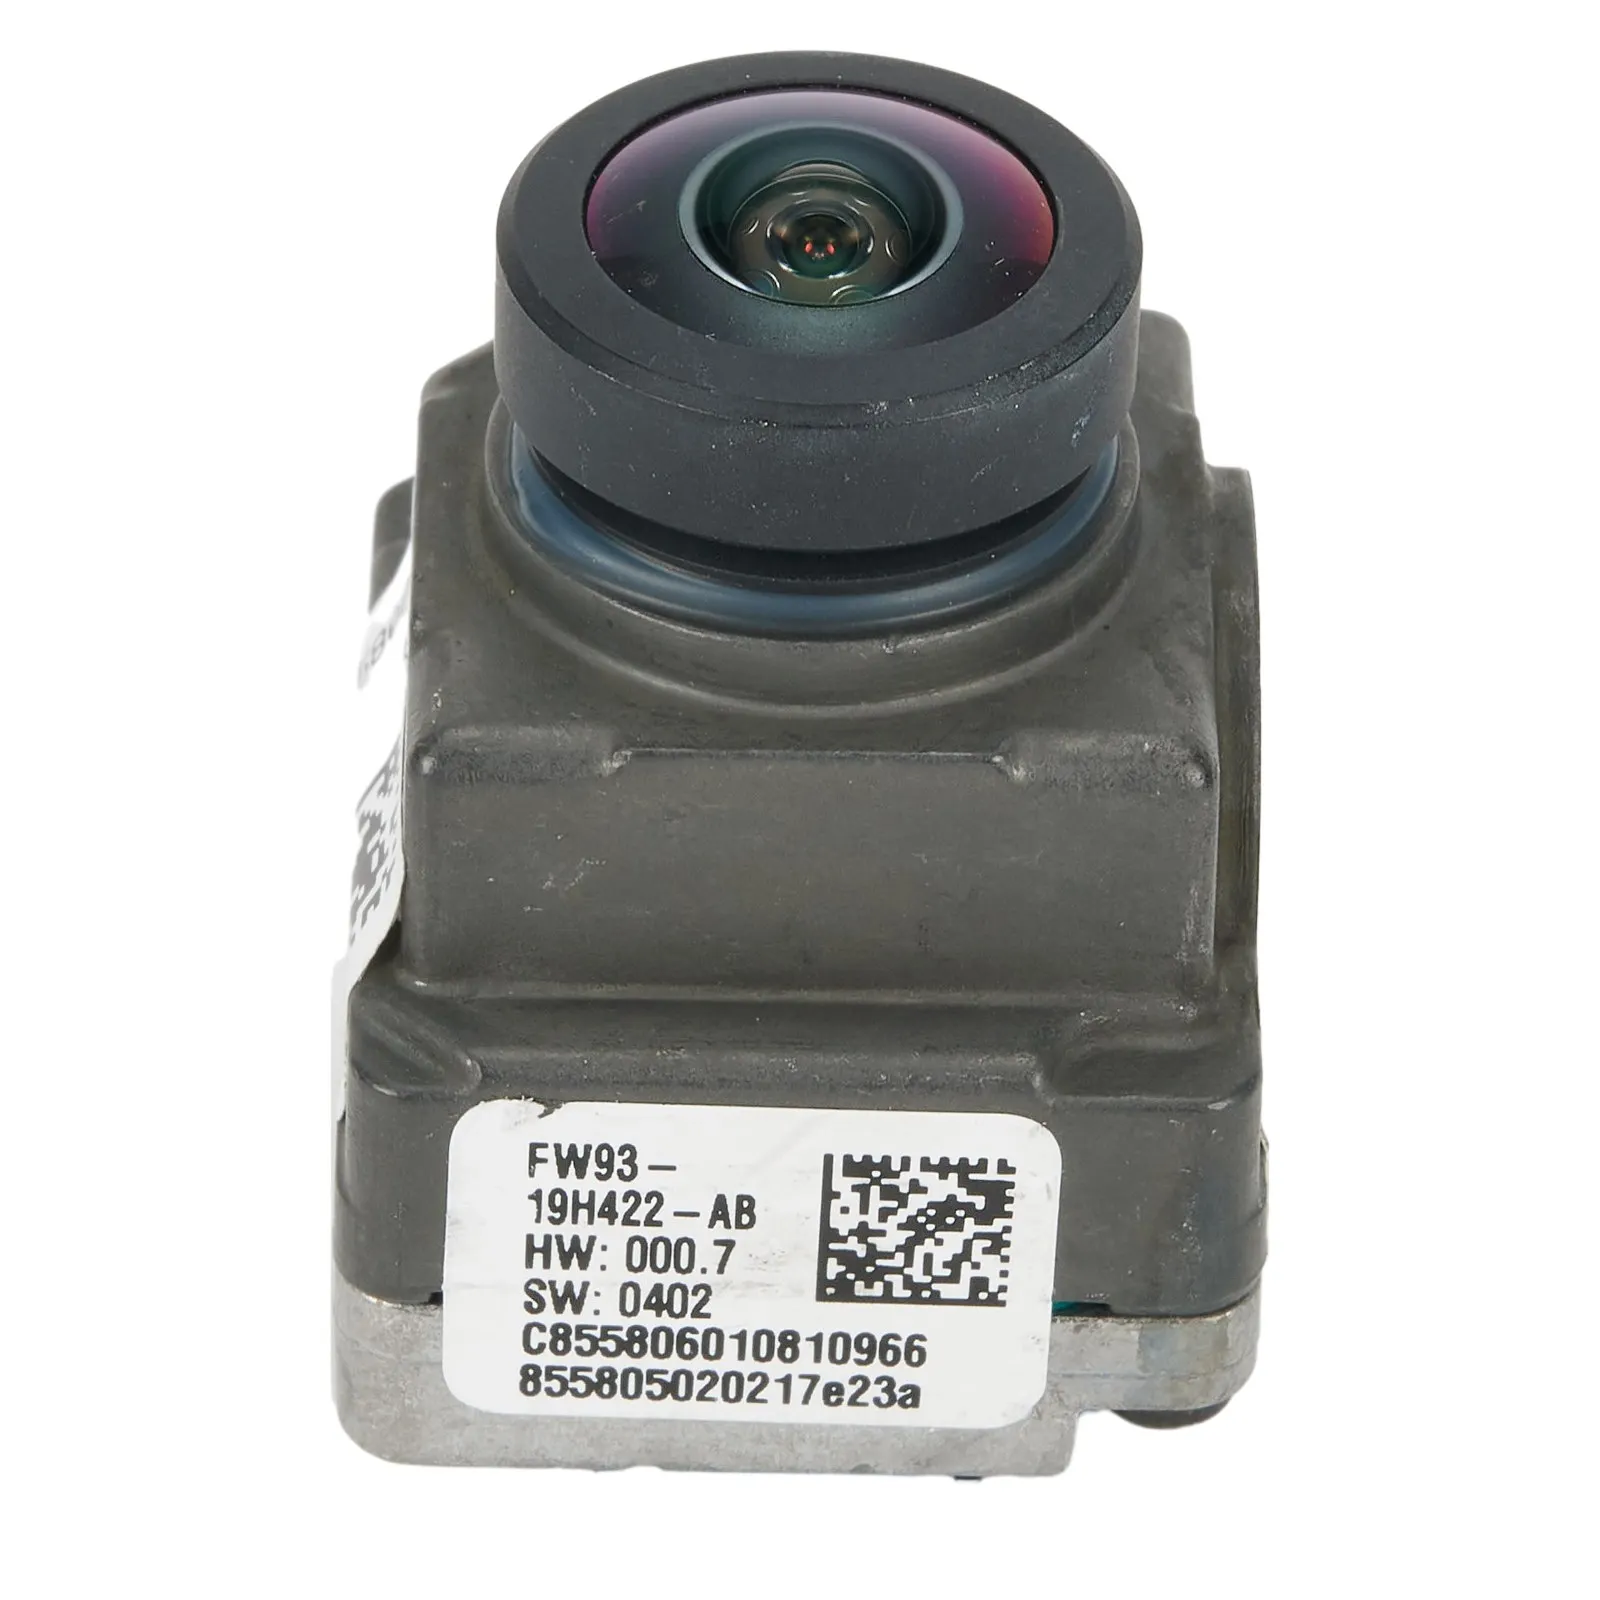 

High Quality Camera Car FW93-19H422-AB LR060915 Reversing Wear-resistant ABS Components Corrosion-resistant Electronic